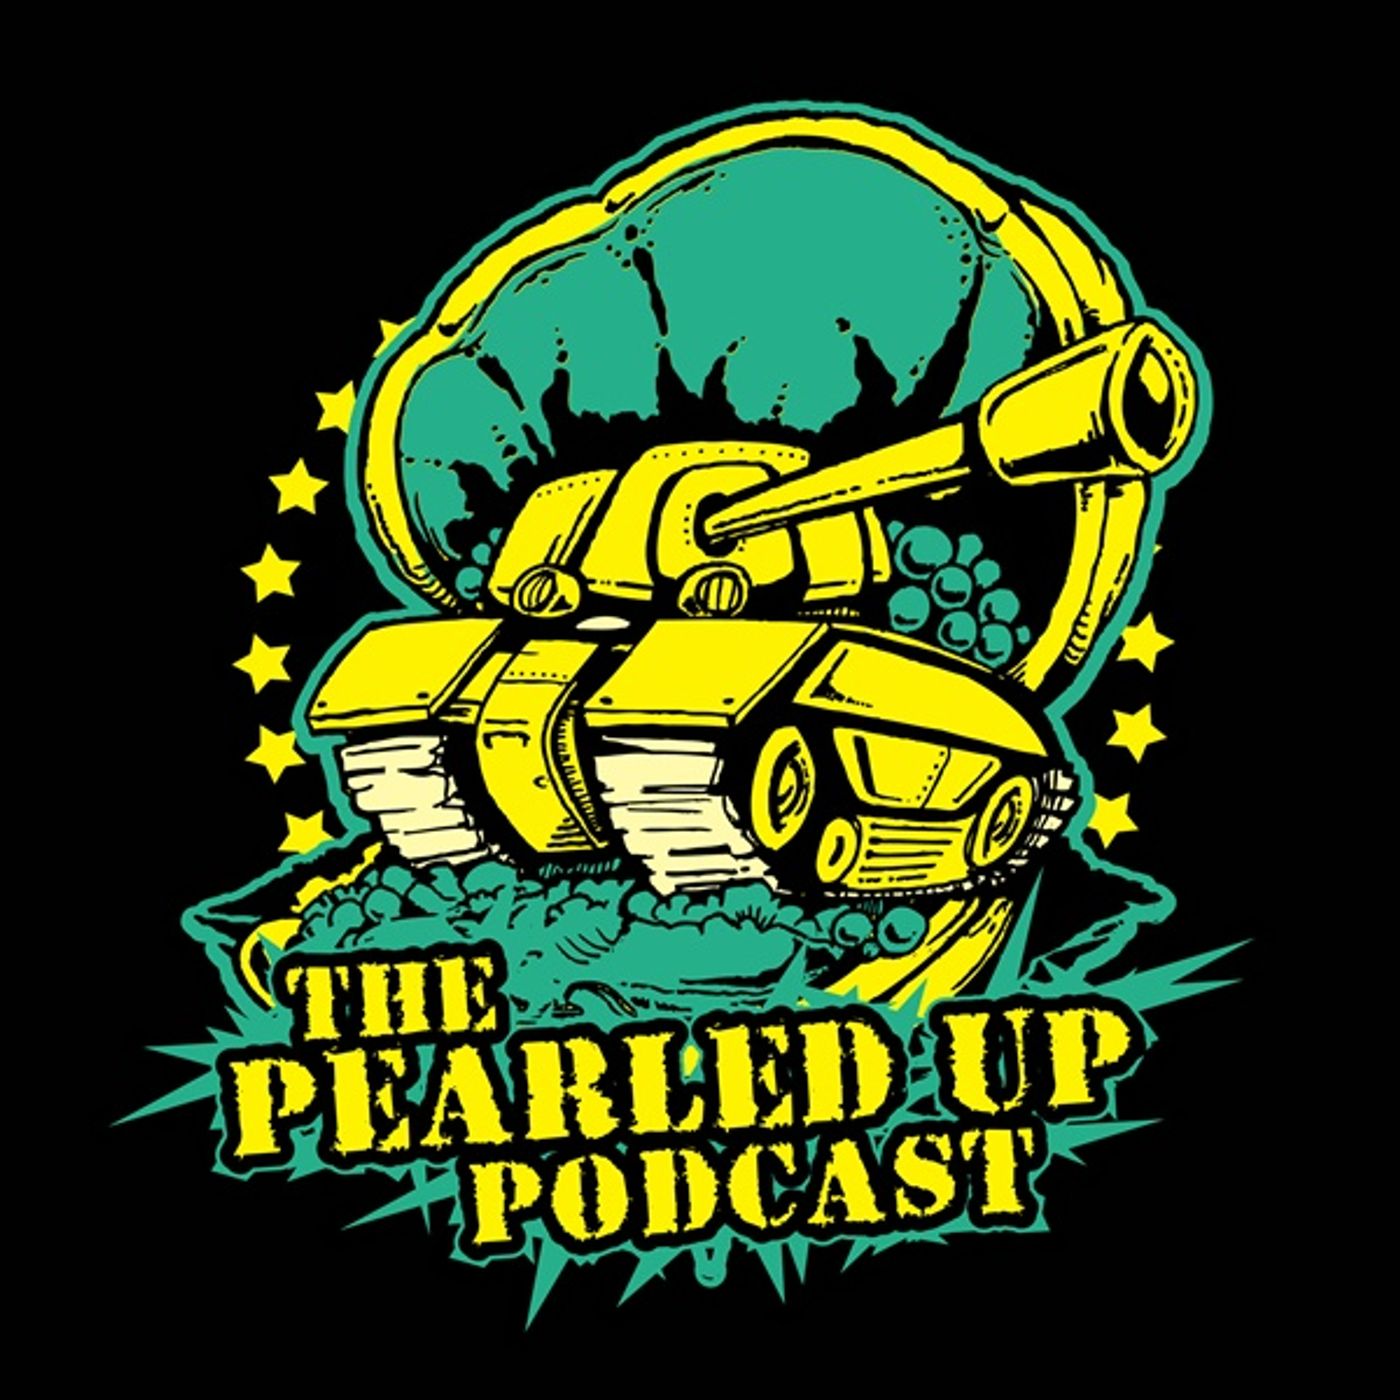 The Pearled Up Podcast Presents